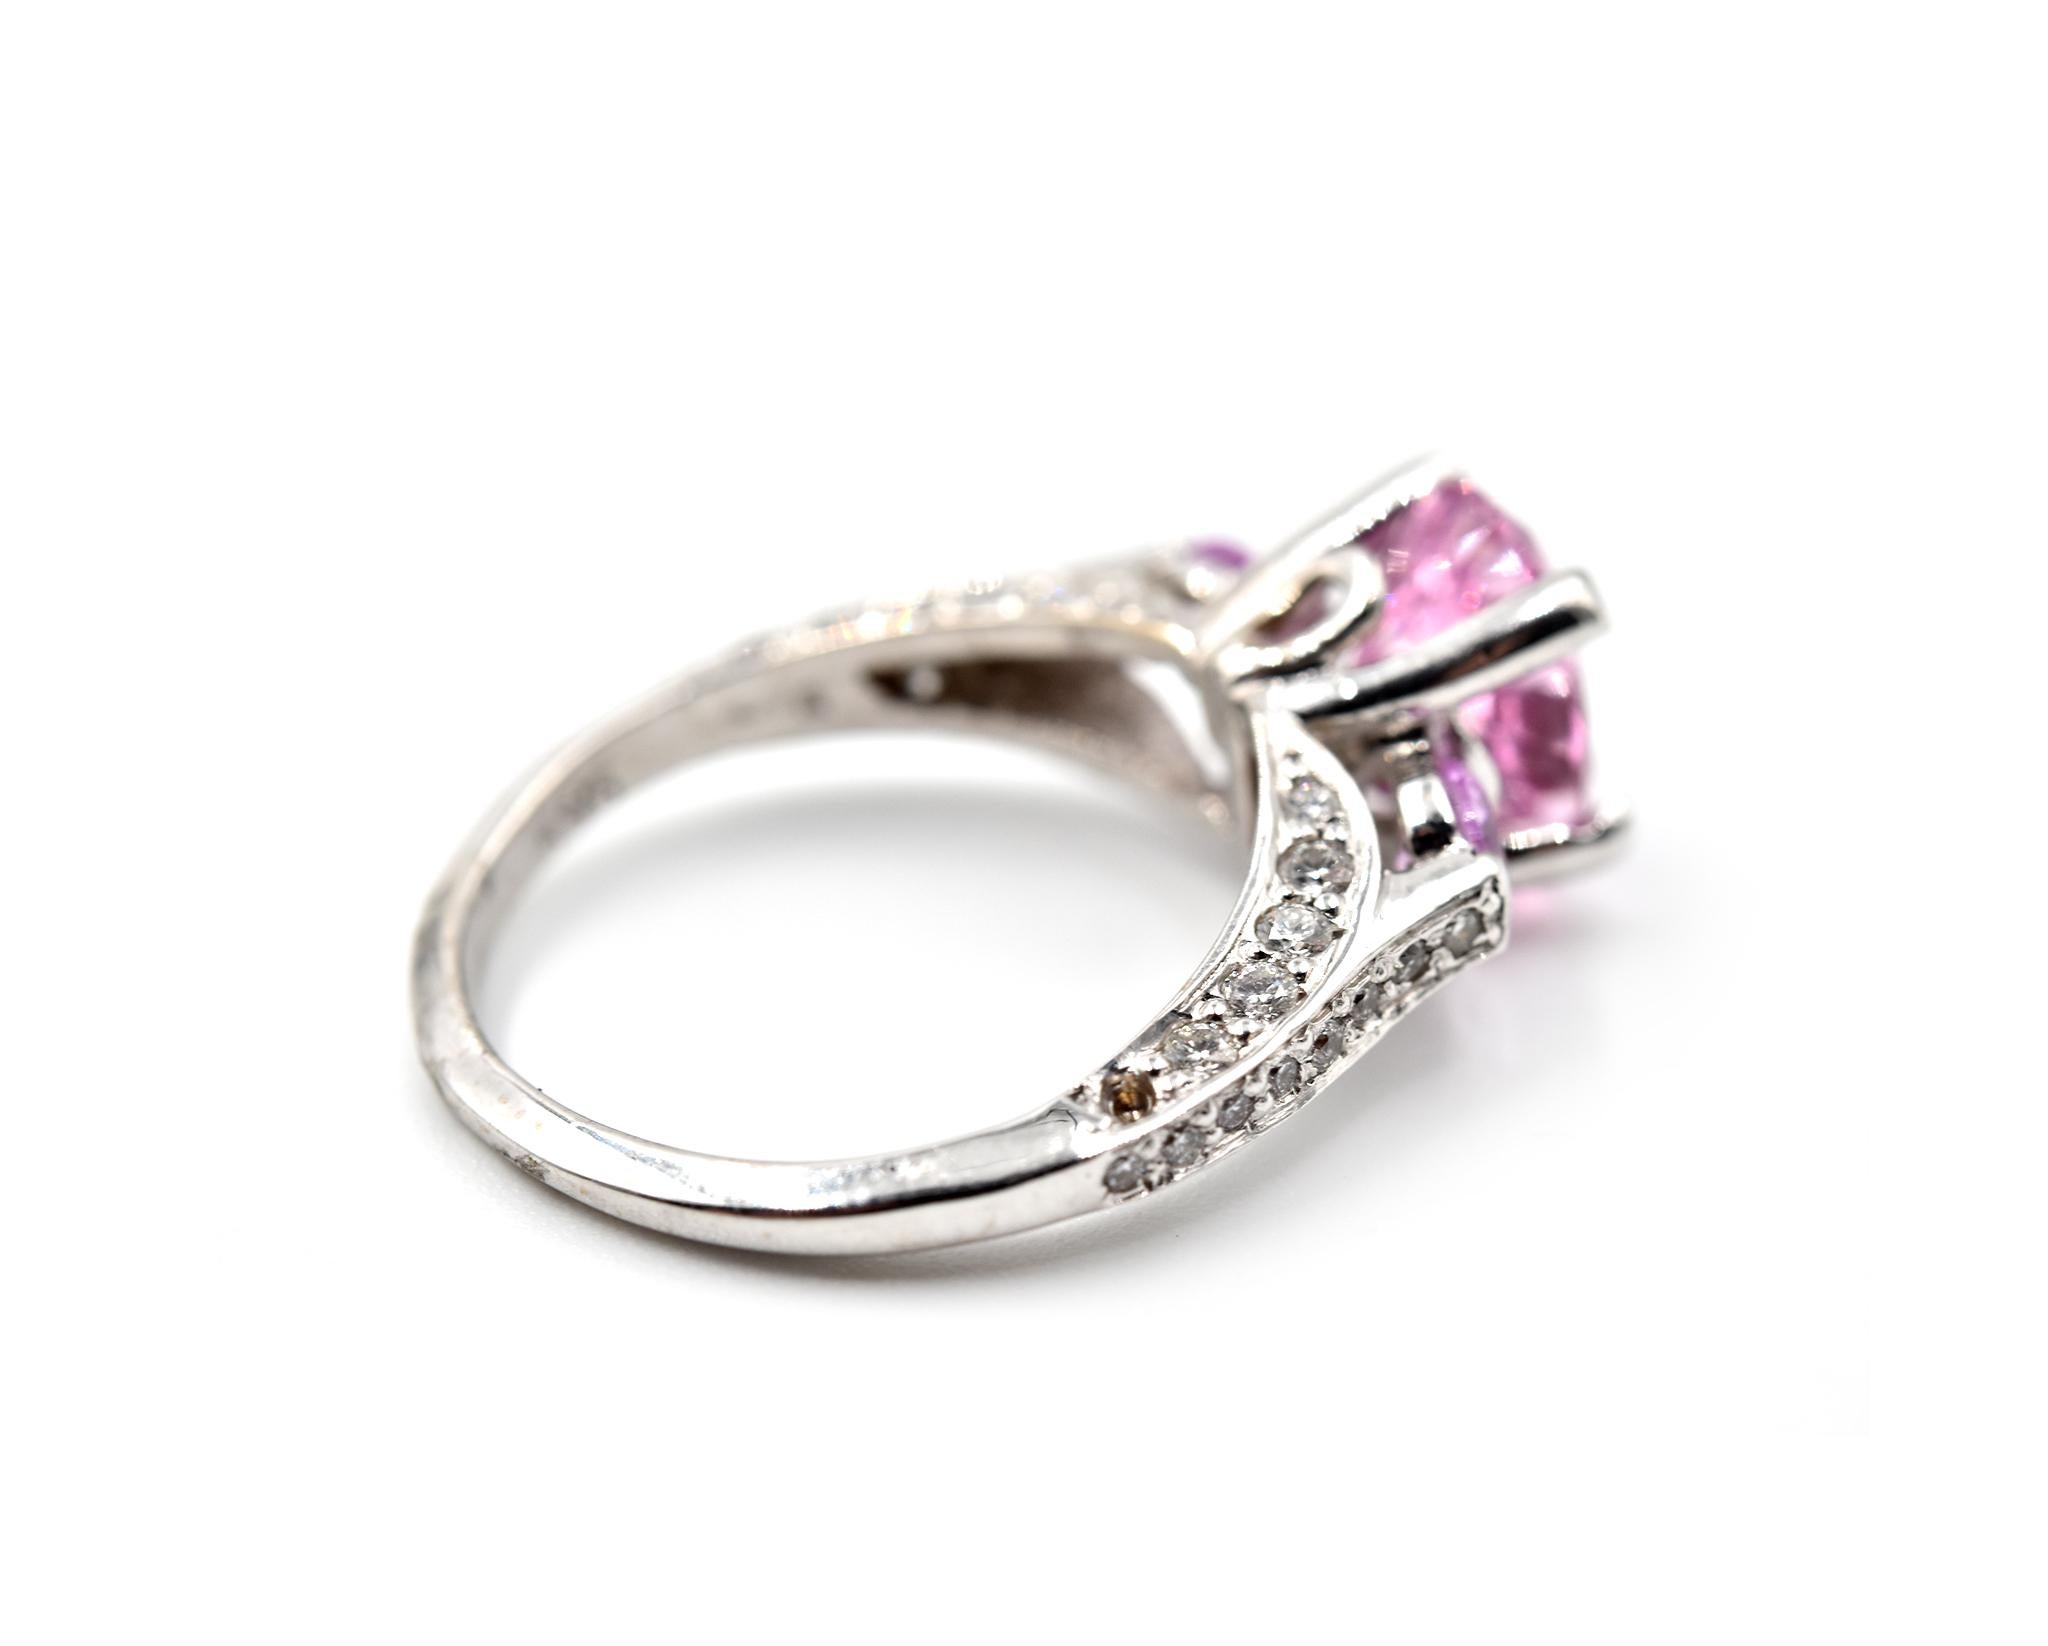 Pink Spinel and Diamond 18 Karat White Gold Ring In Excellent Condition For Sale In Scottsdale, AZ